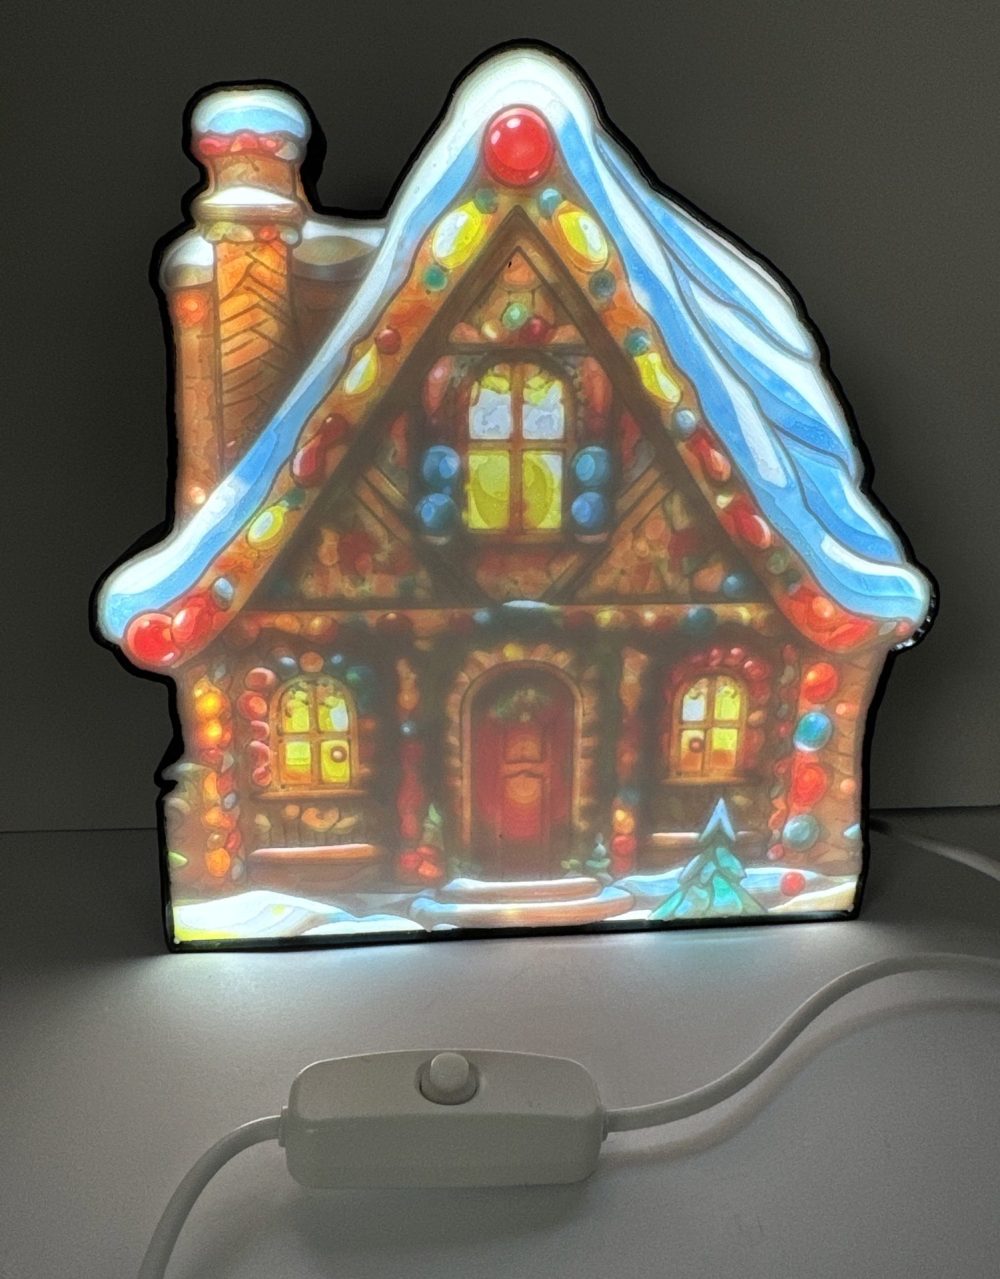 Illuminated gingerbread house LED light with vibrant colors and detailed candy decorations.